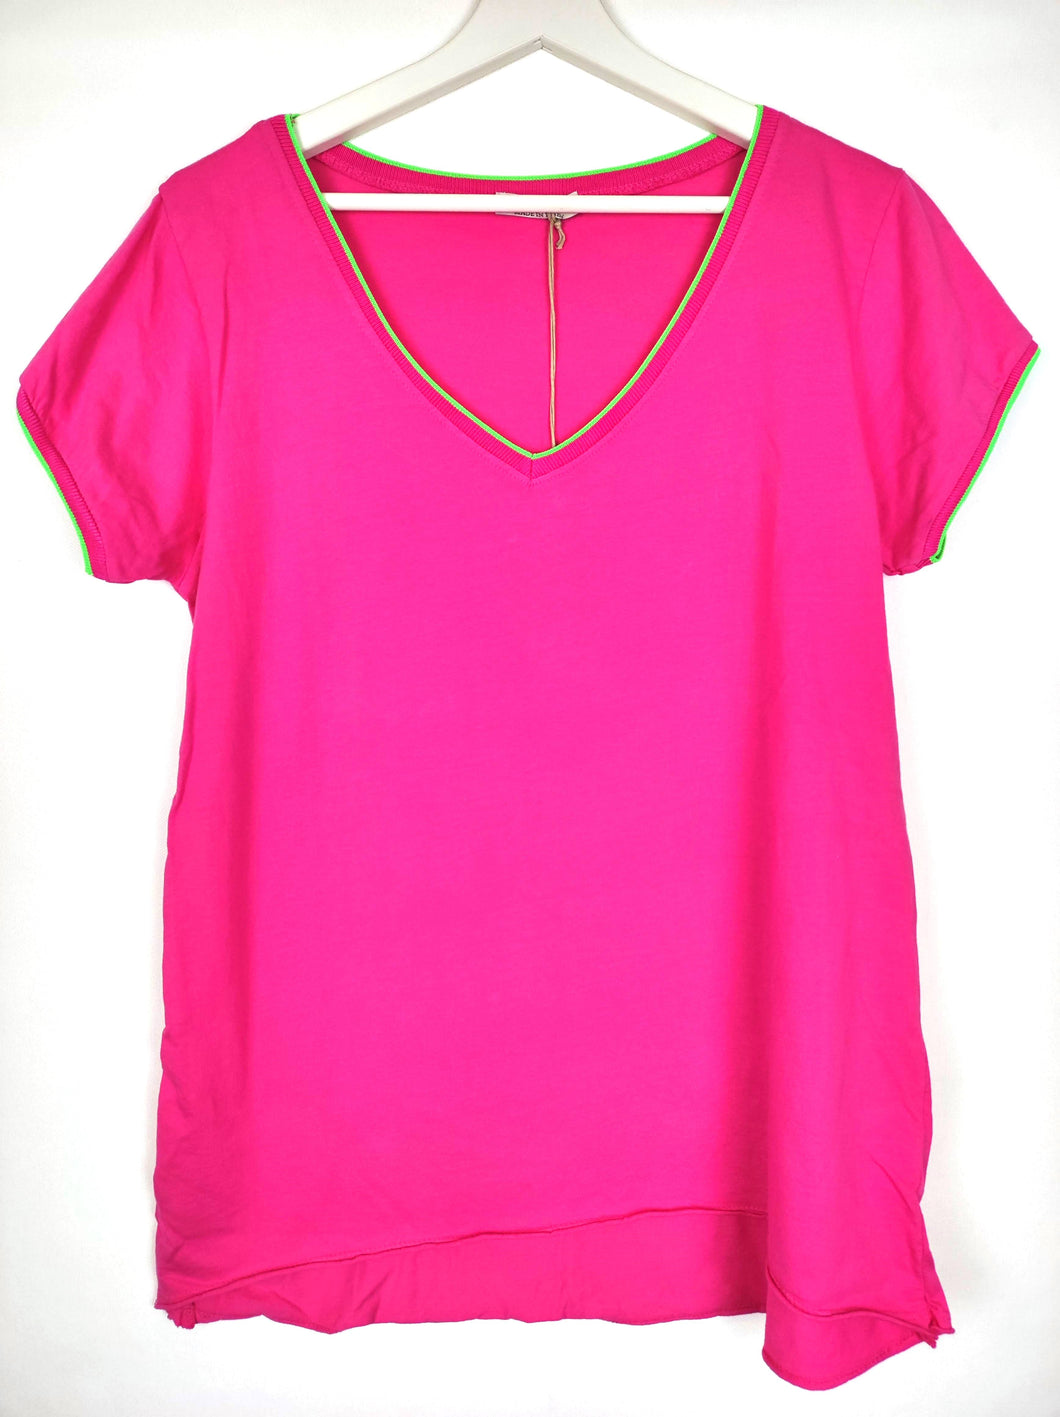 T-SHIRT PURE PINK V-NECK ONE SIZE